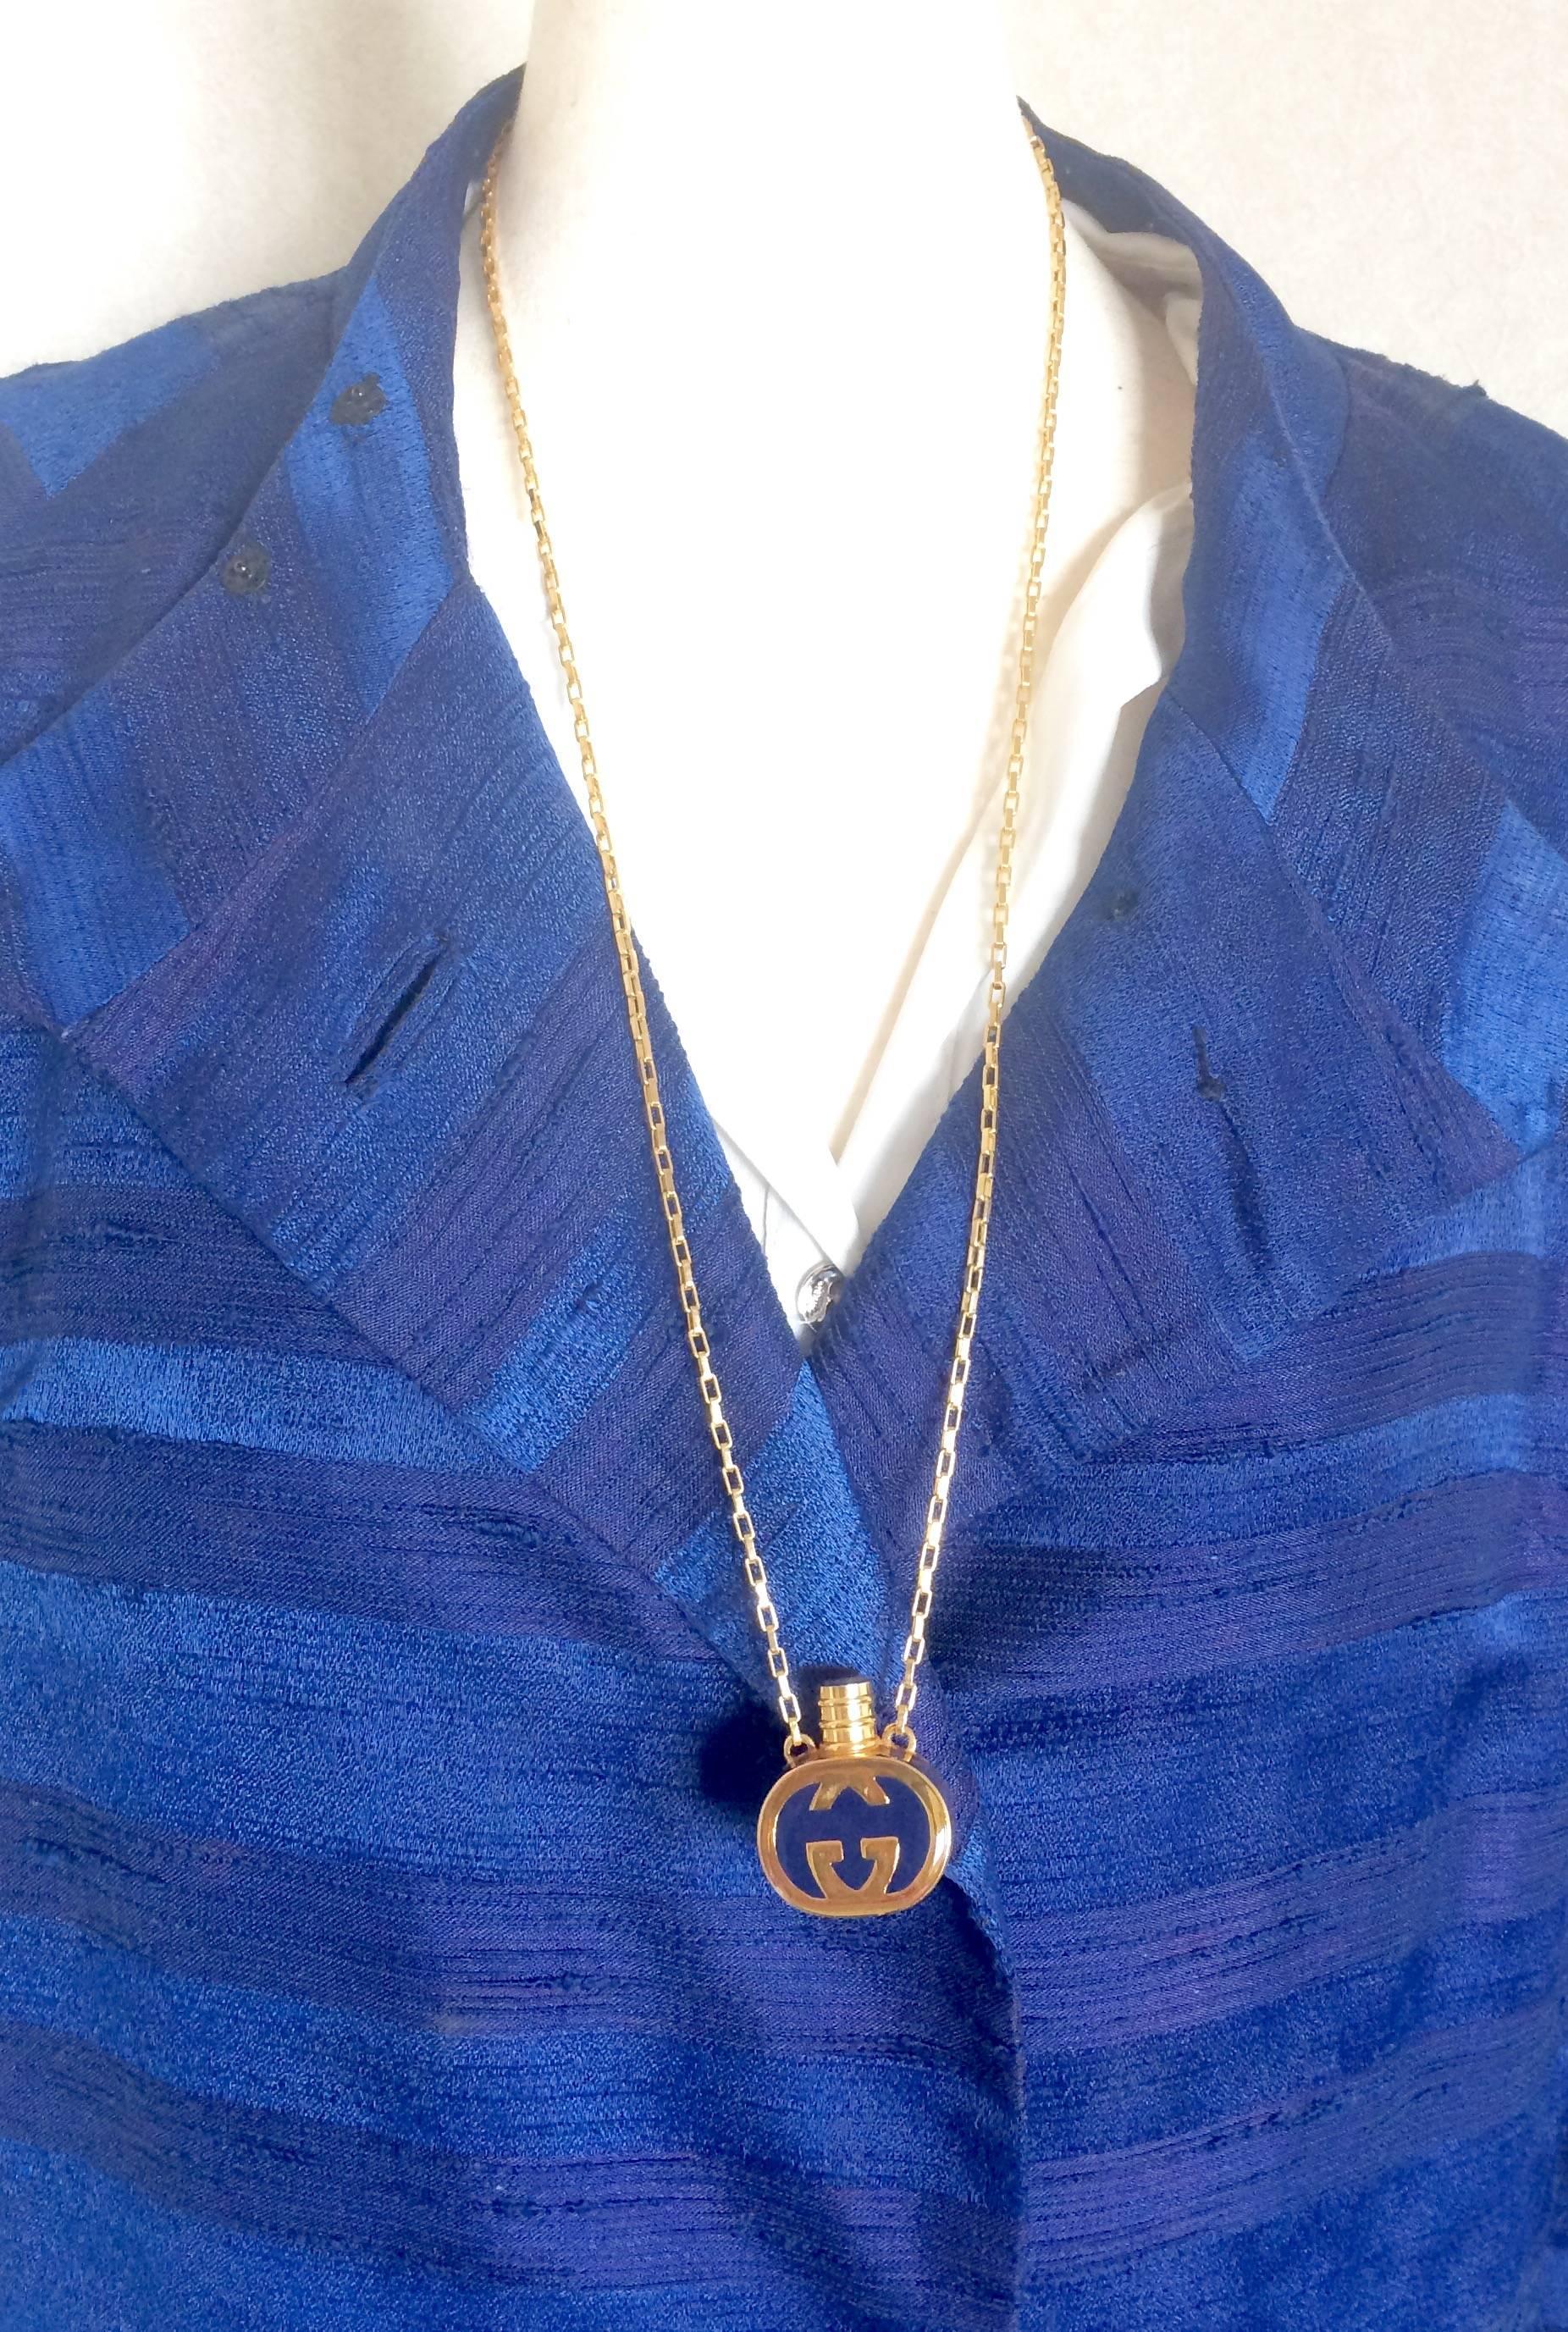 1980s. Vintage Gucci gold and navy round shape perfume bottle necklace with iconic logo mark. Perfect rare Gucci gift.


Beautiful vintage condition!

If you are looking for vintage Gucci necklace, then do not miss this opportunity!
Here is another